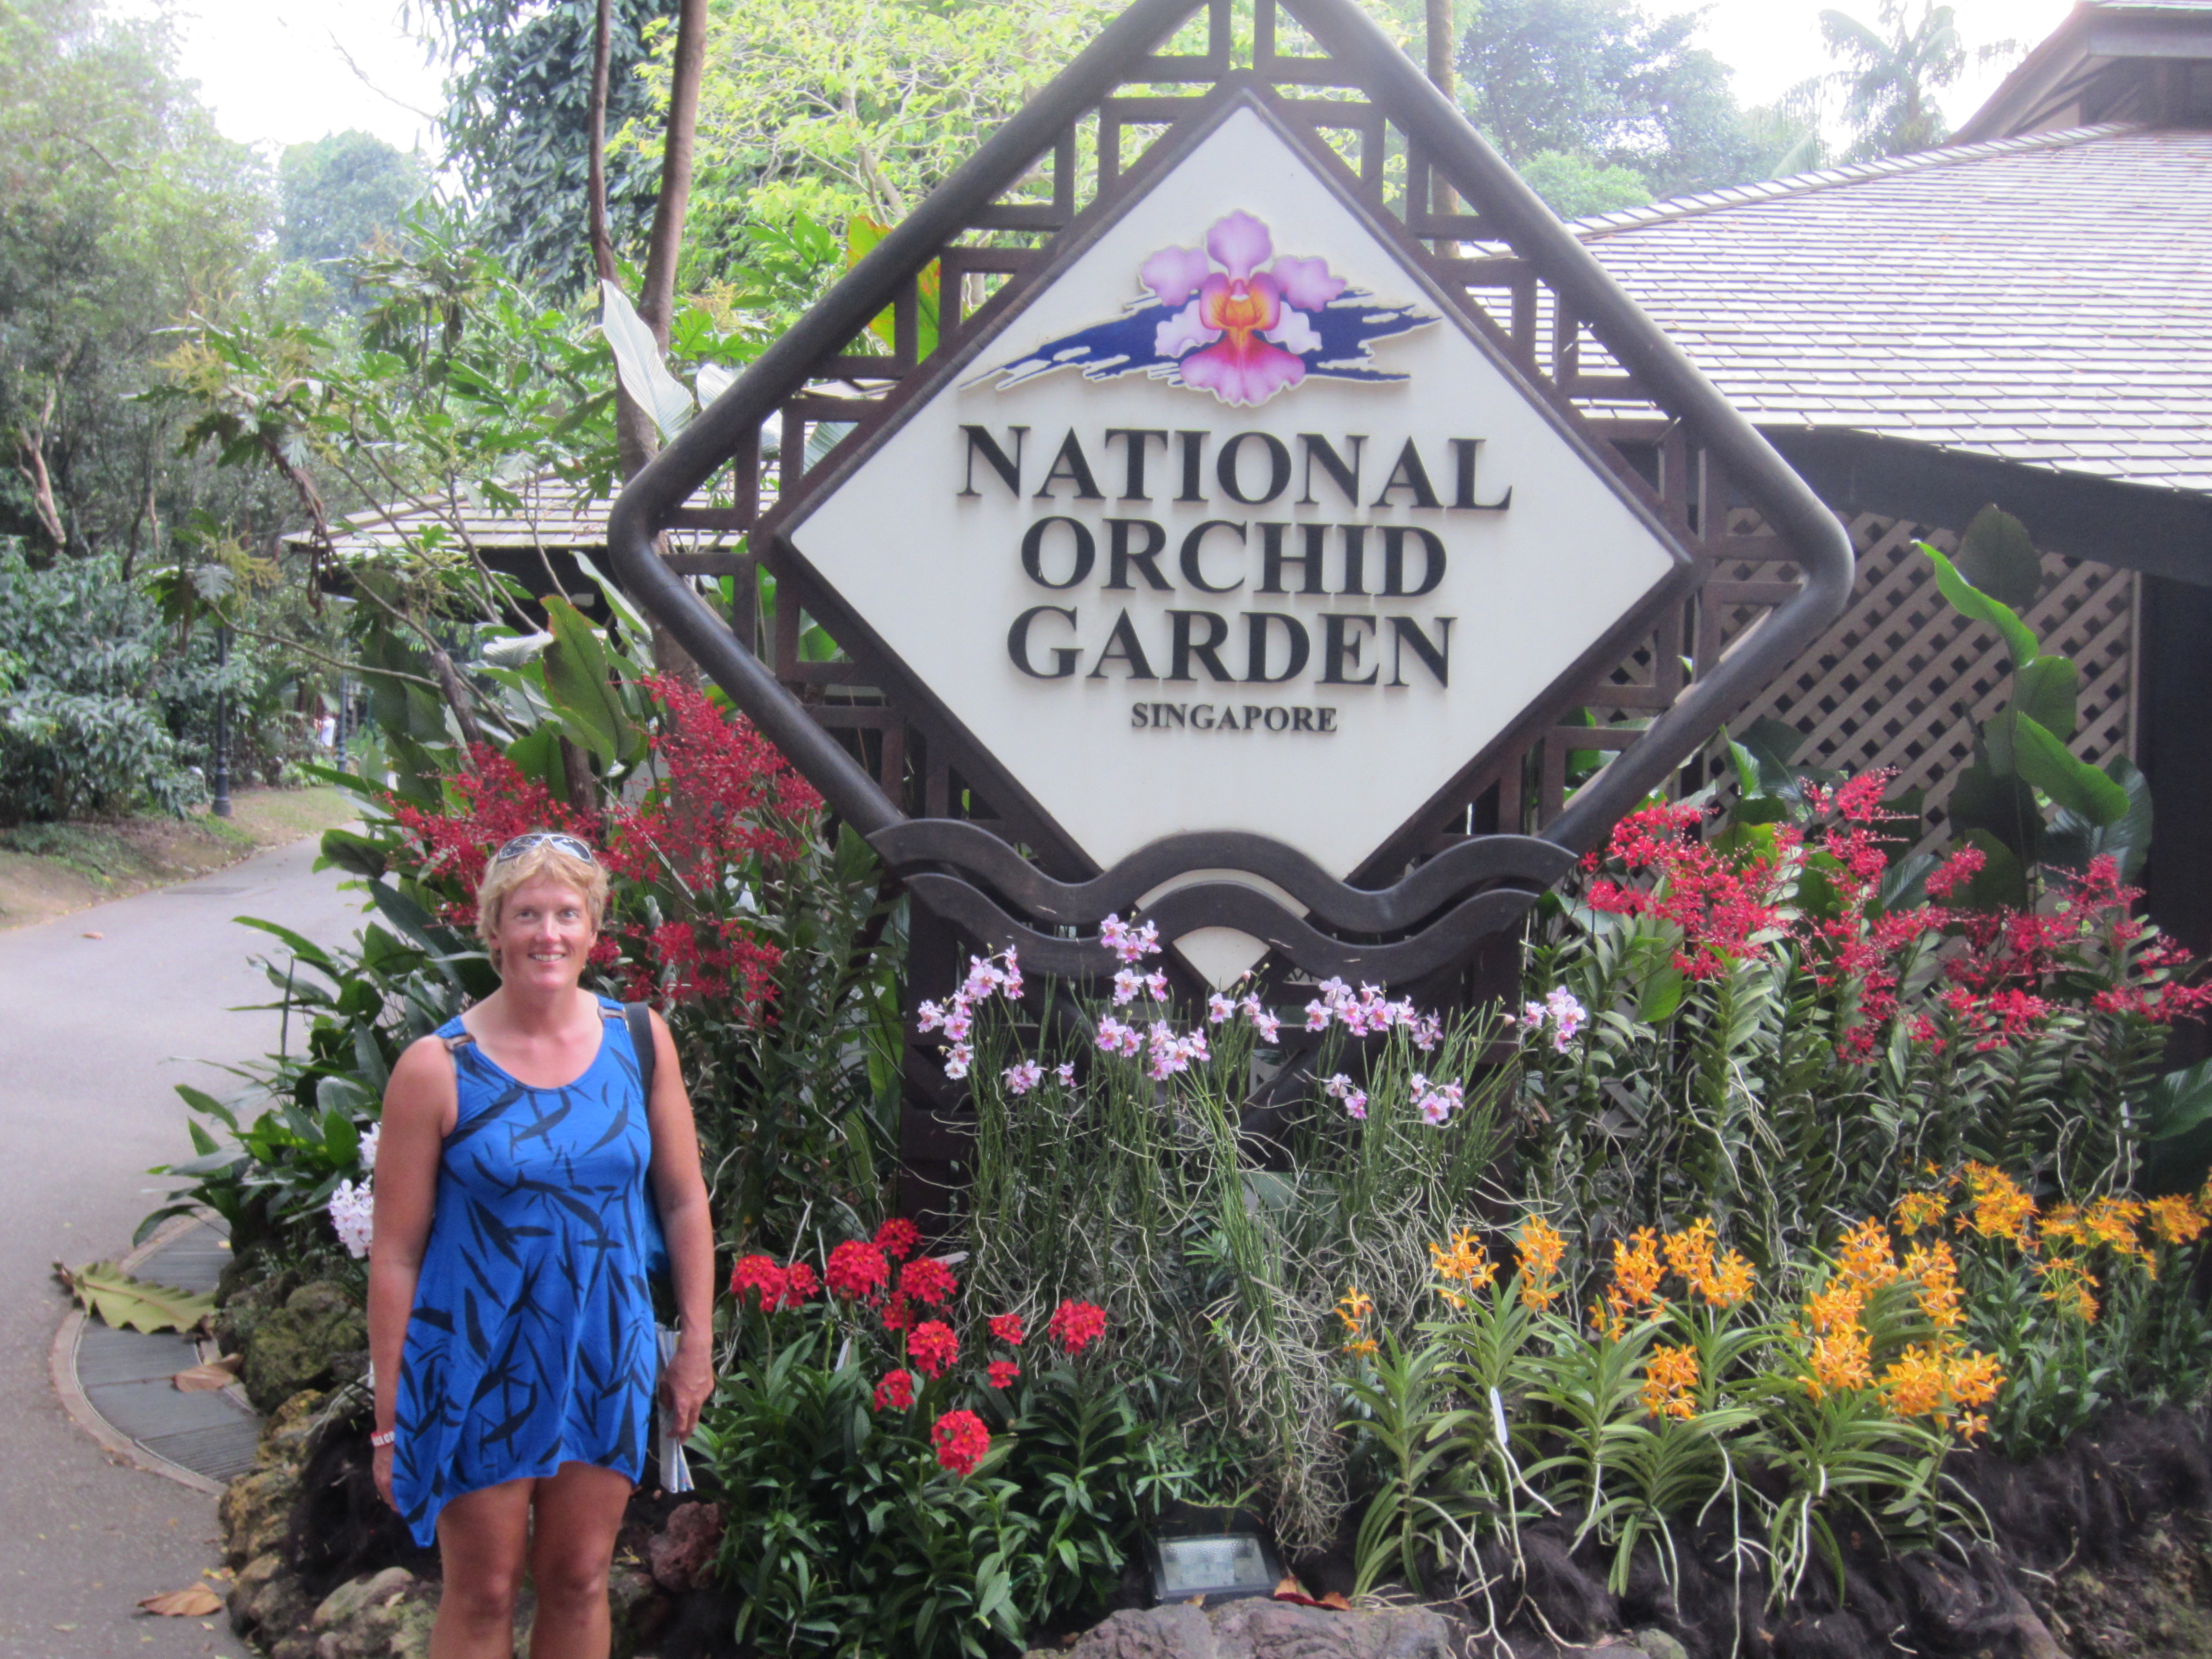 Outside National Orchid Garden